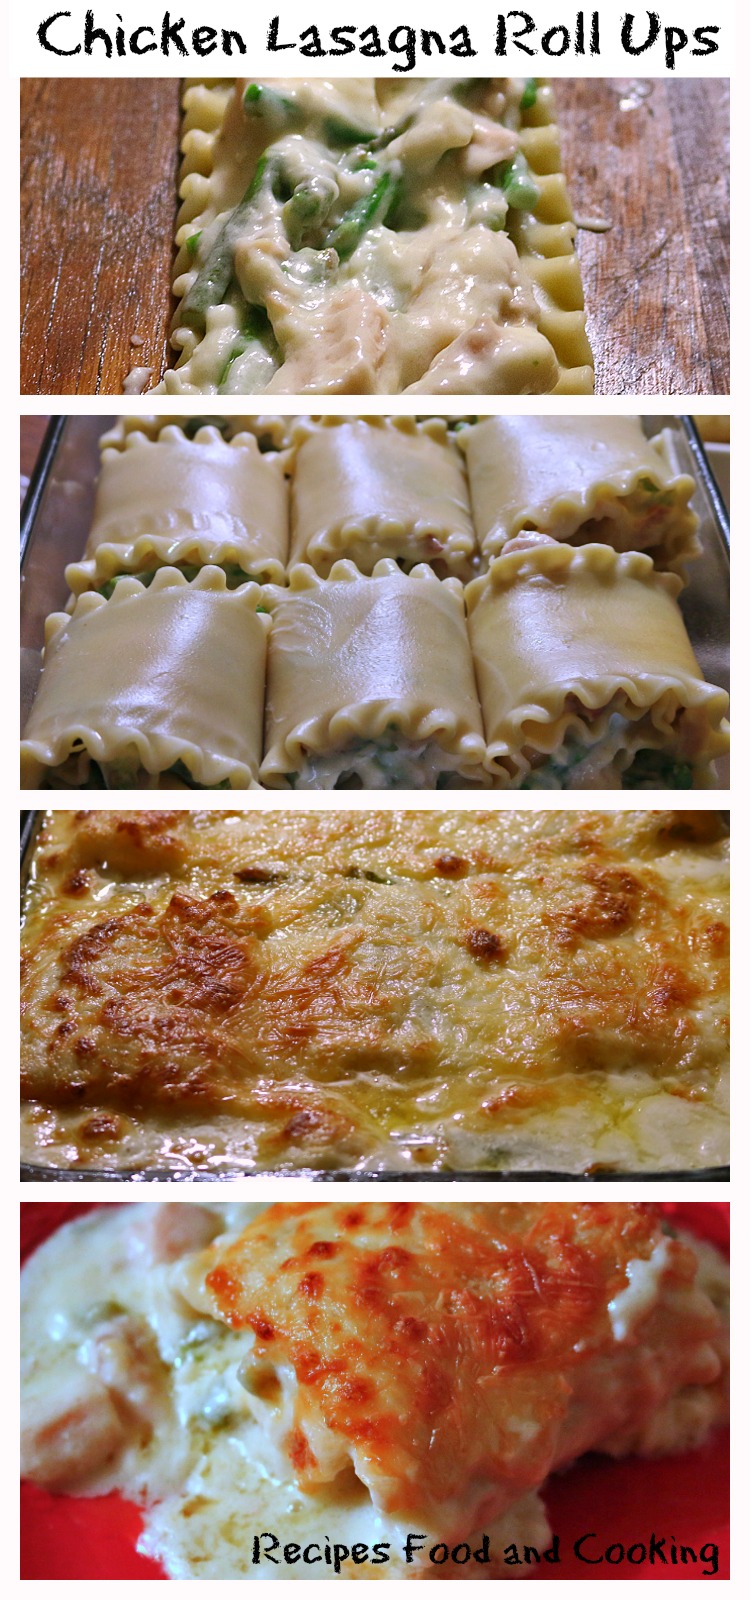 Chicken Lasagna Roll Ups with Asparagus